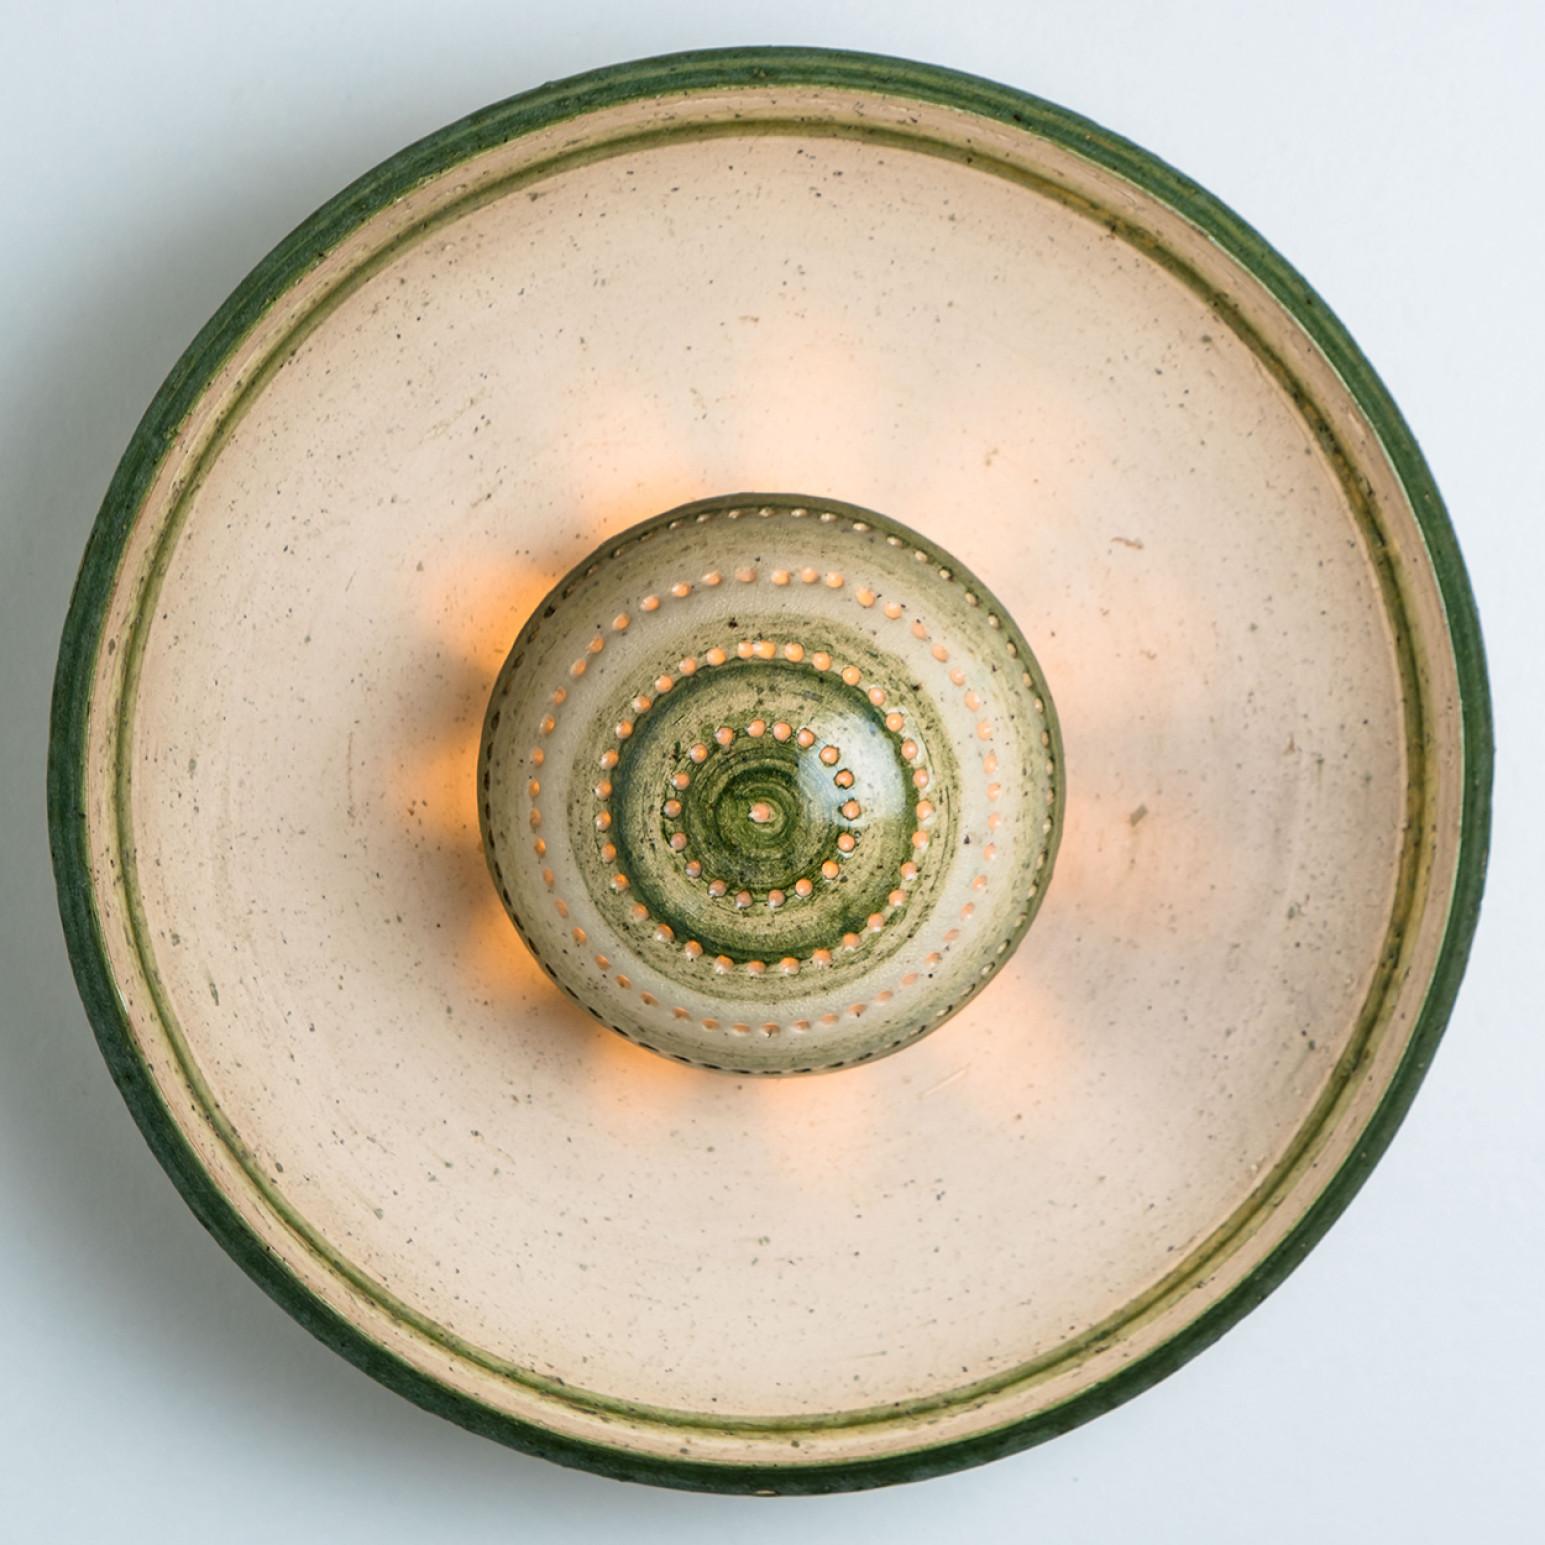 Stunning round wall lamp with an unusual shape, made with rich colored green ceramics and a mushroom-like centre, manufactured in the 1970s in Denmark.

Dimensions:
Diameter: 10.23